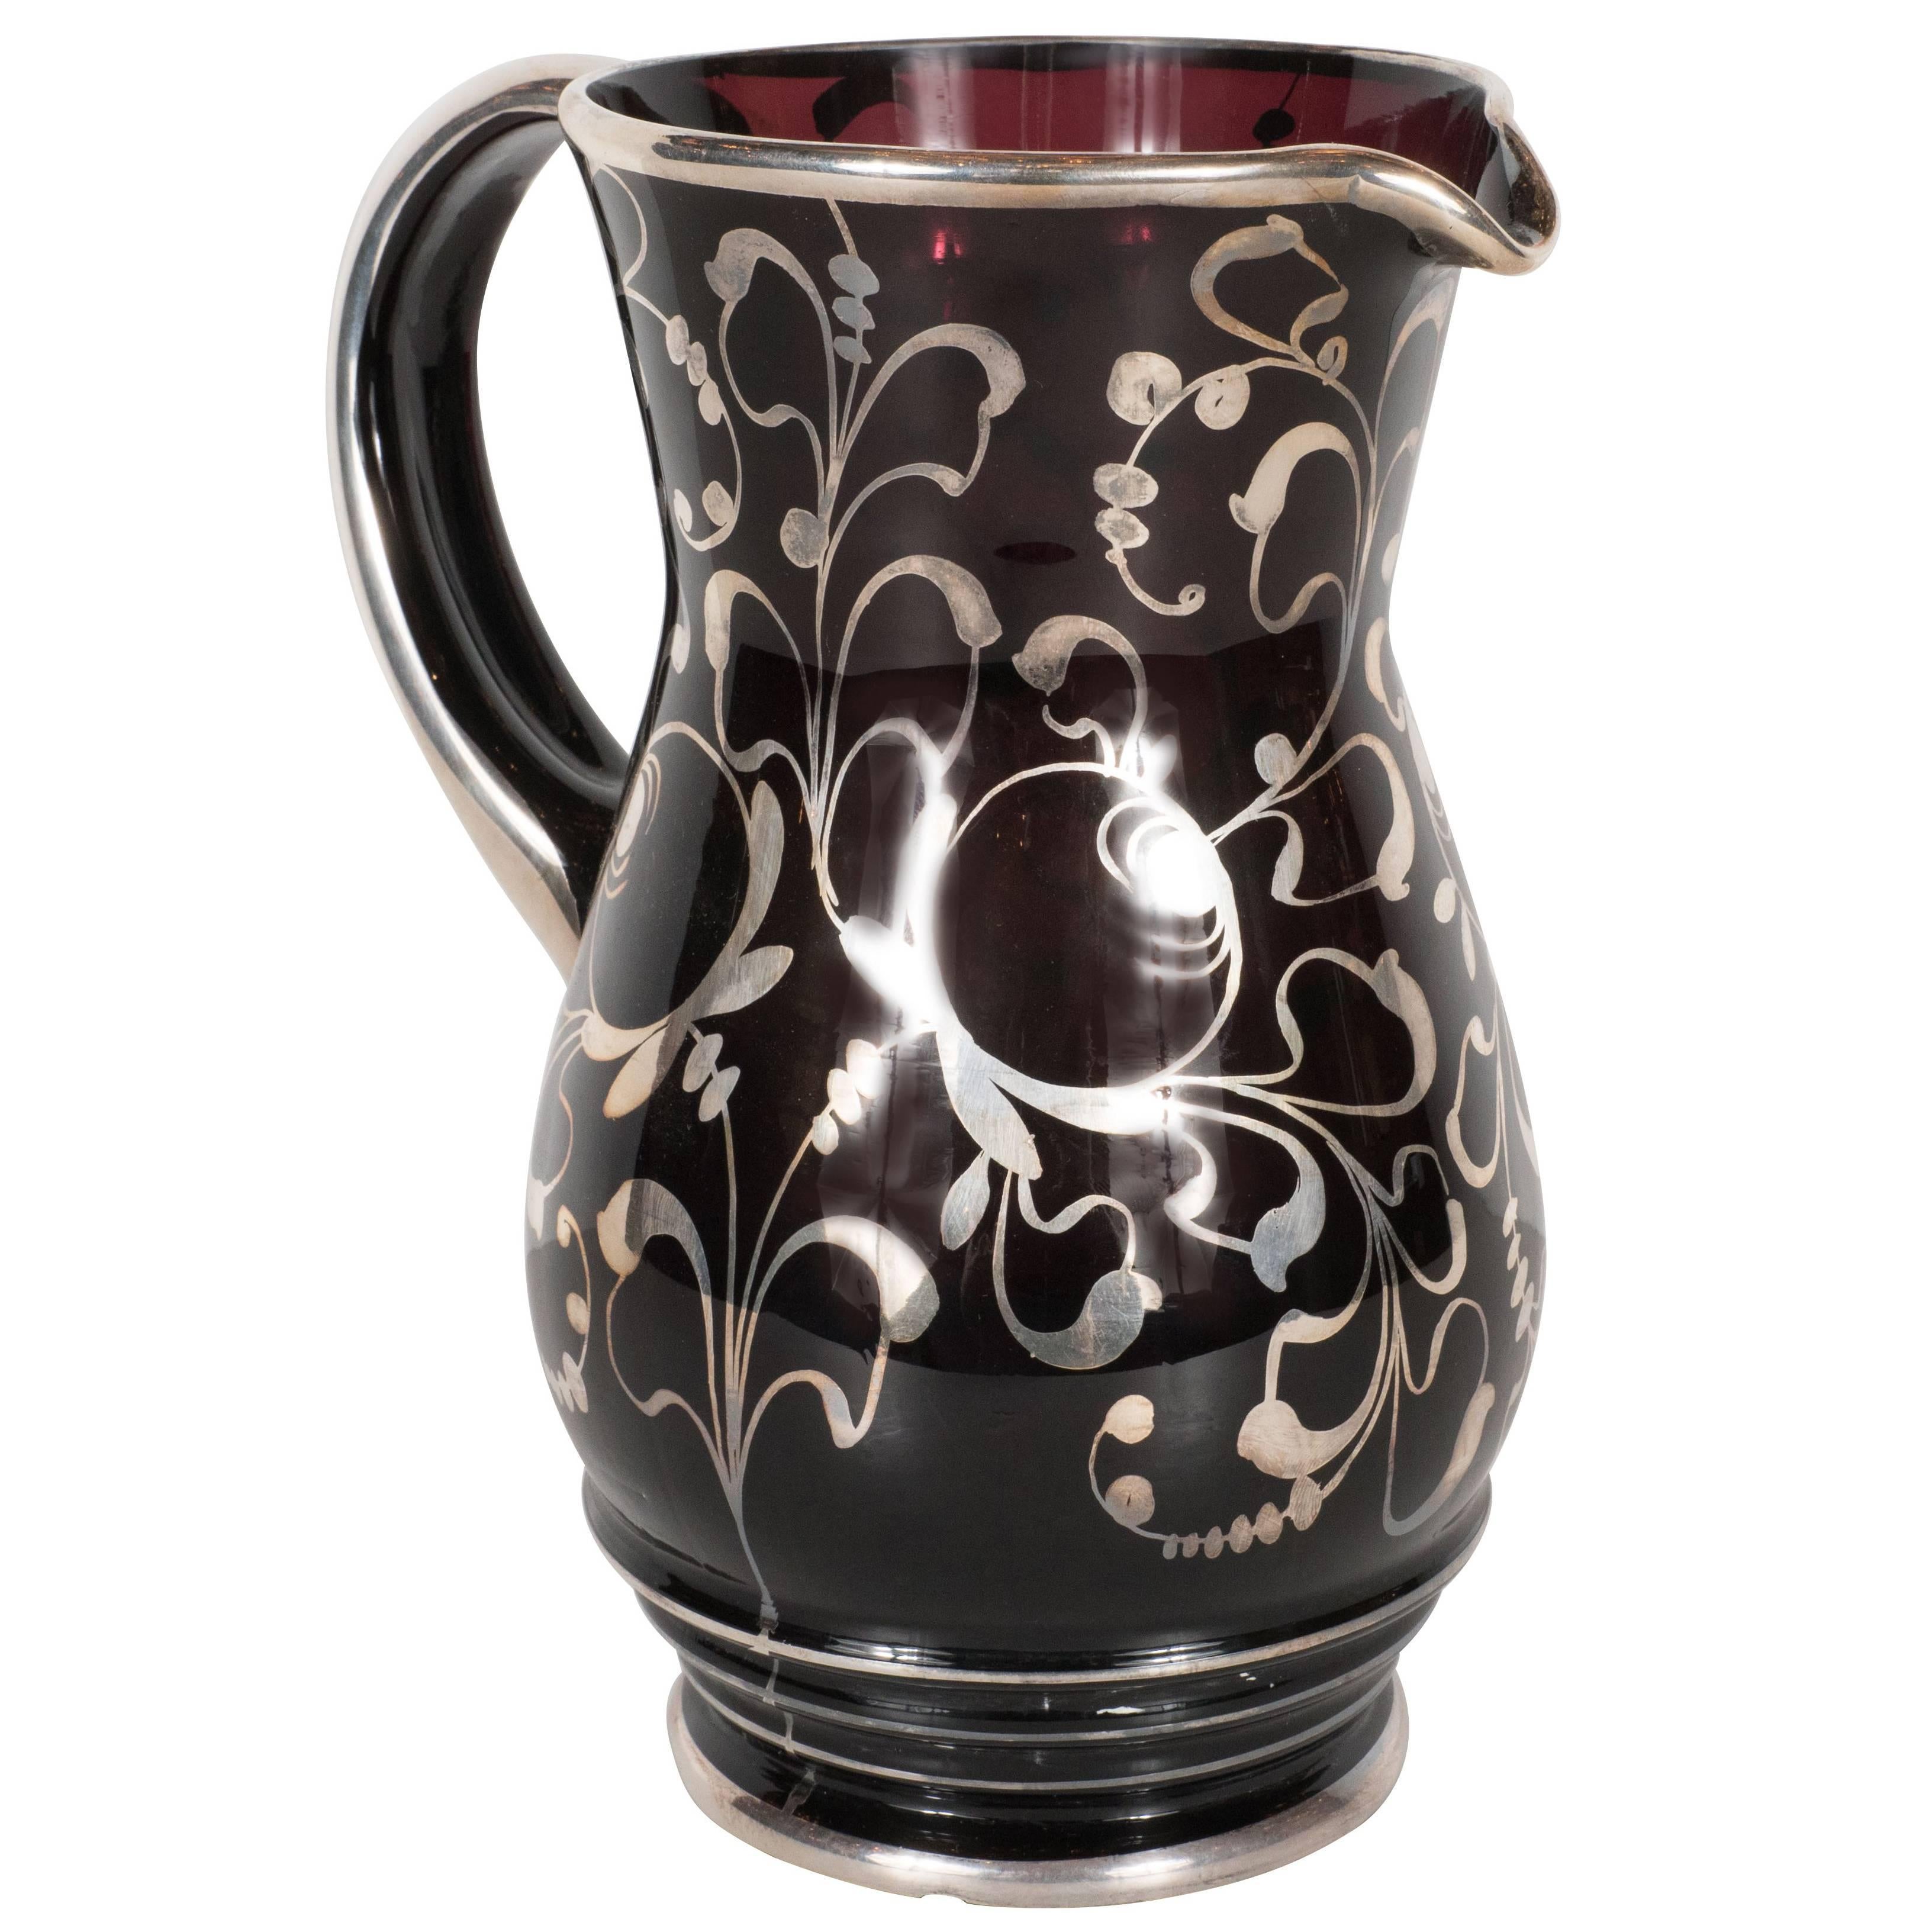 Stunning Art Deco Black Glass Pitcher with Sterling Silver Overlay